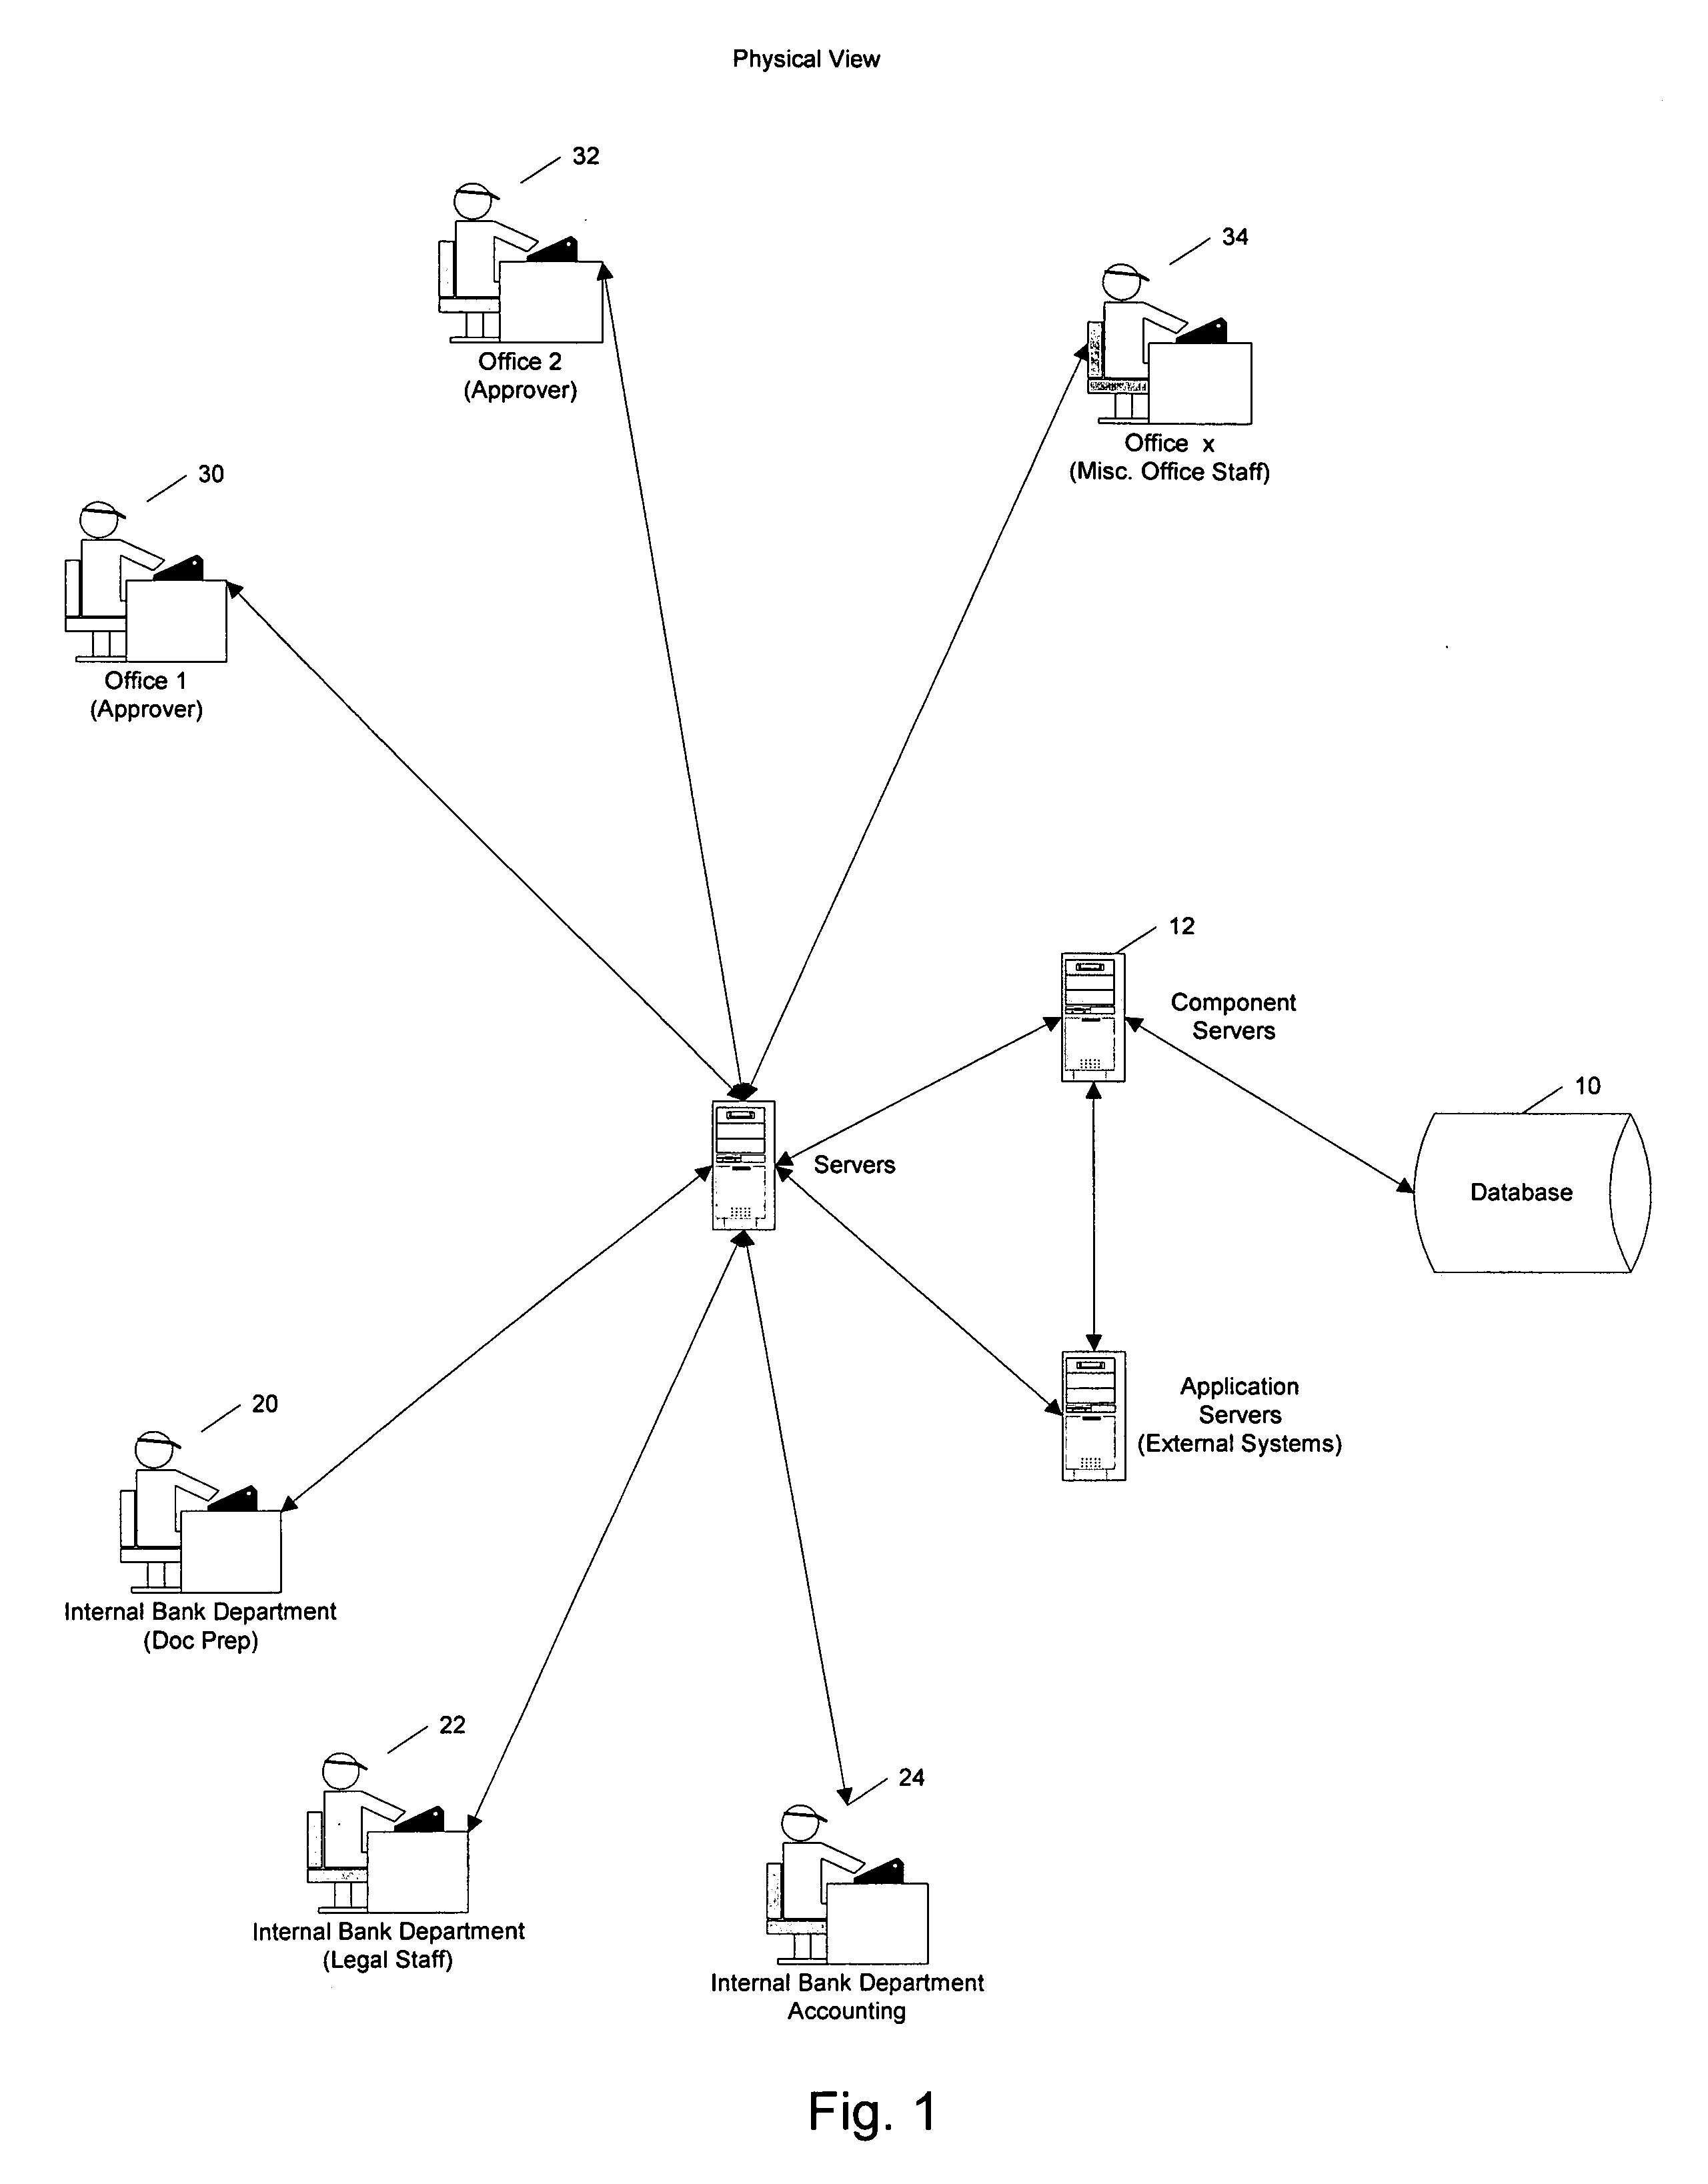 Transaction workflow and data collection system